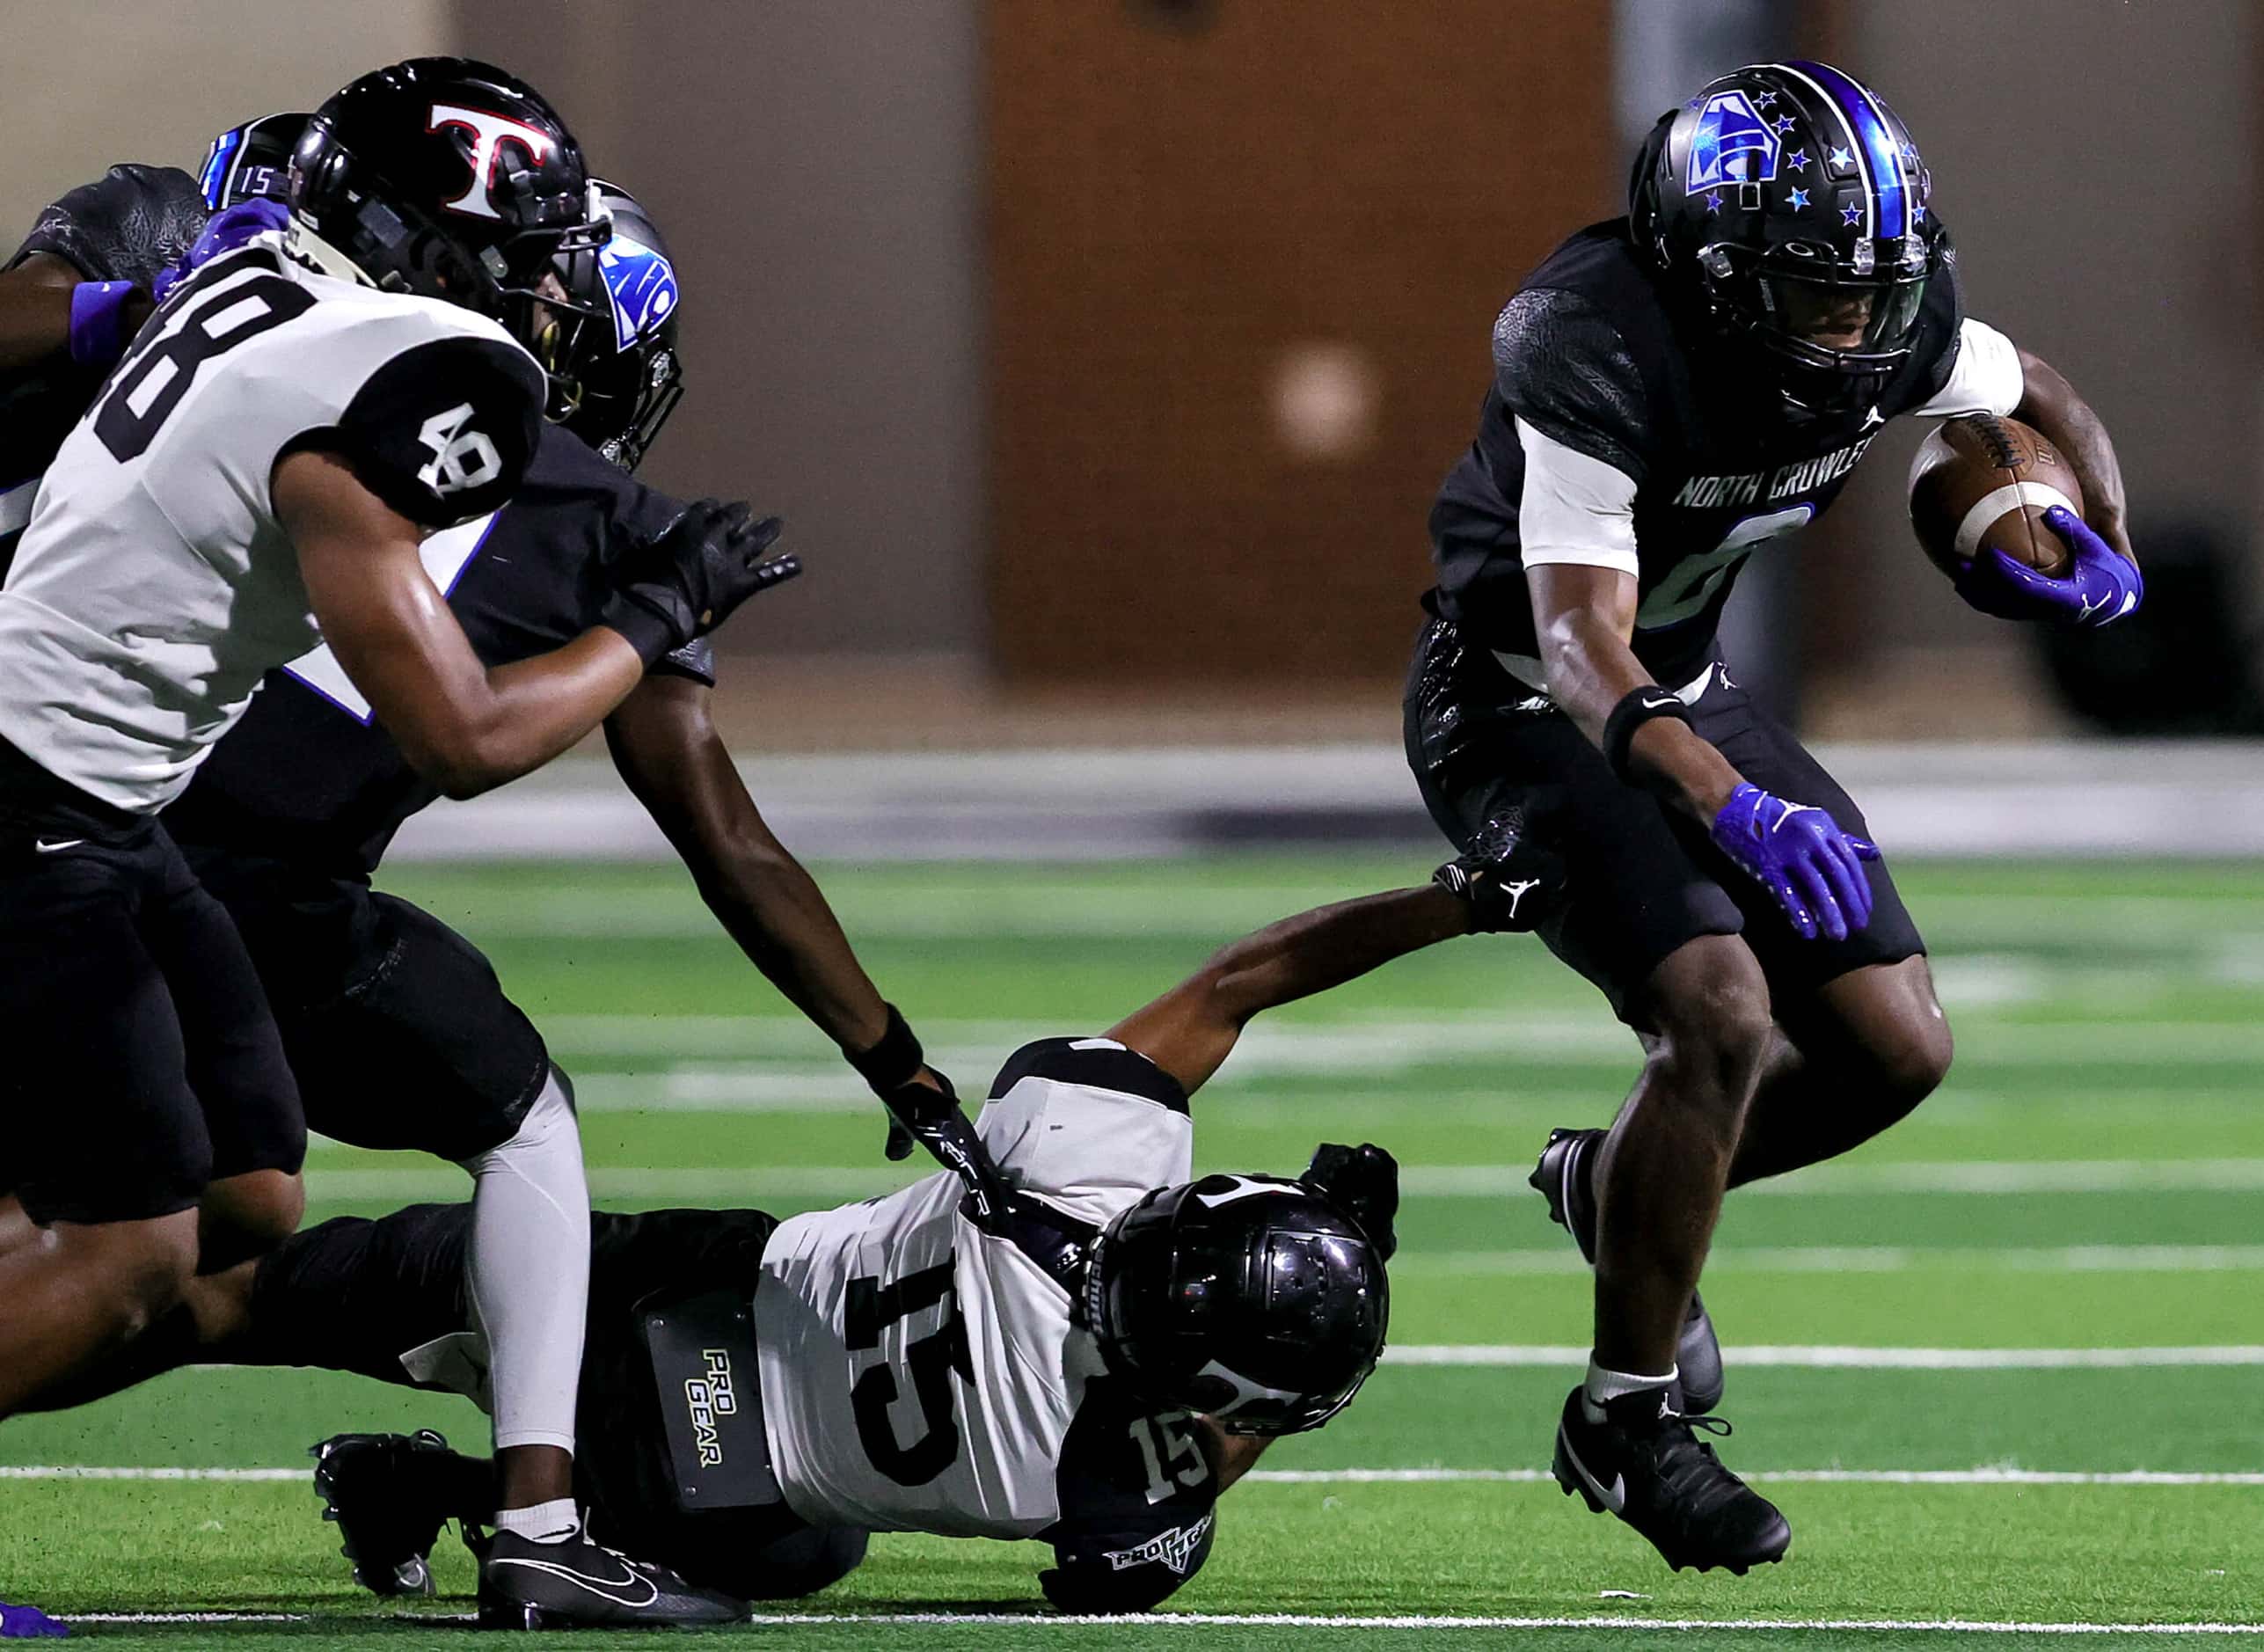 North Crowley running back Ashton Searl (8) breaks free from Euless Trinity defensive back...